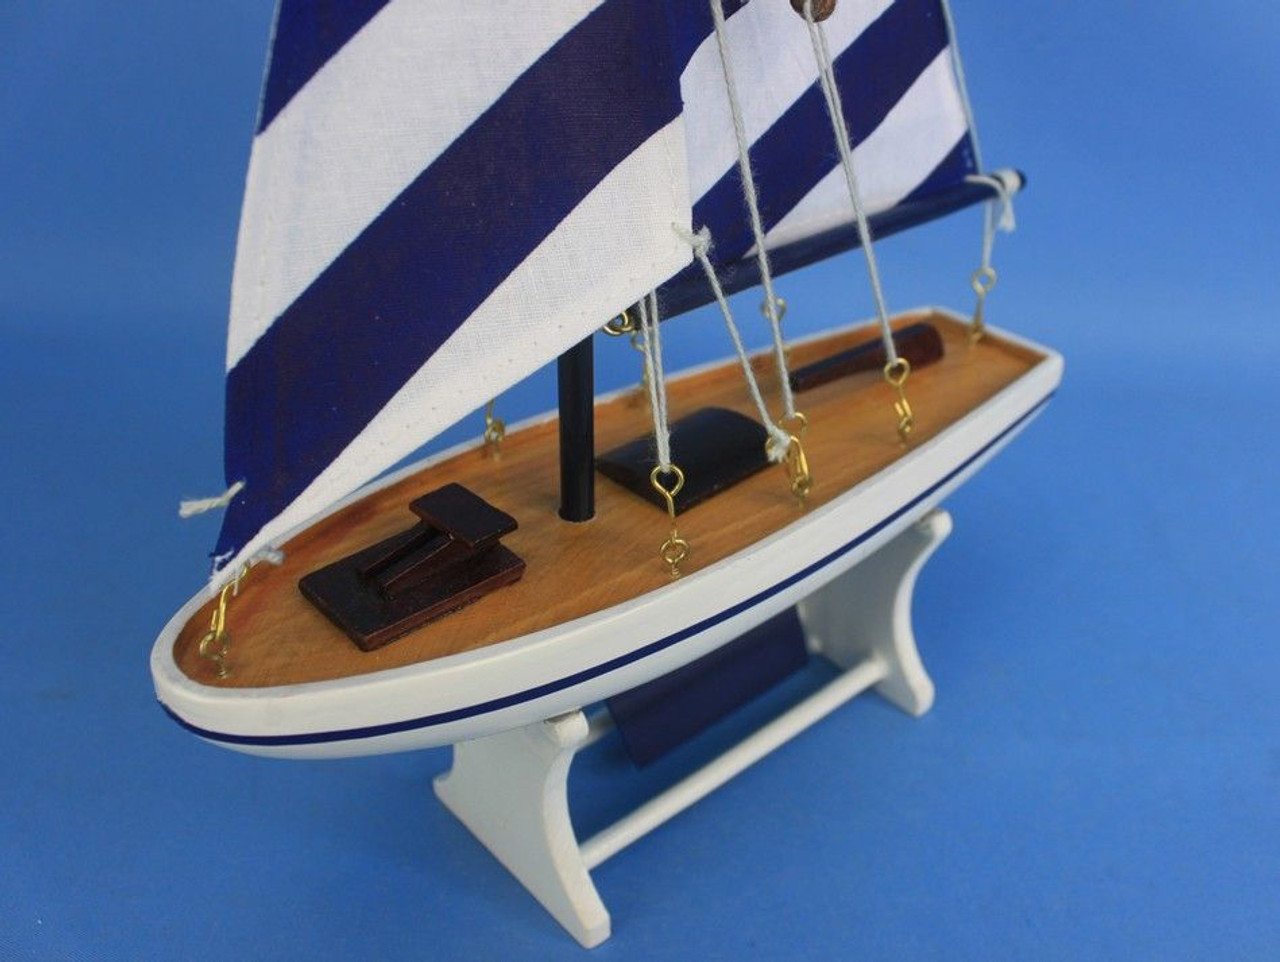 Sailboat Model with Blue Stripes 12" - Min. of 2